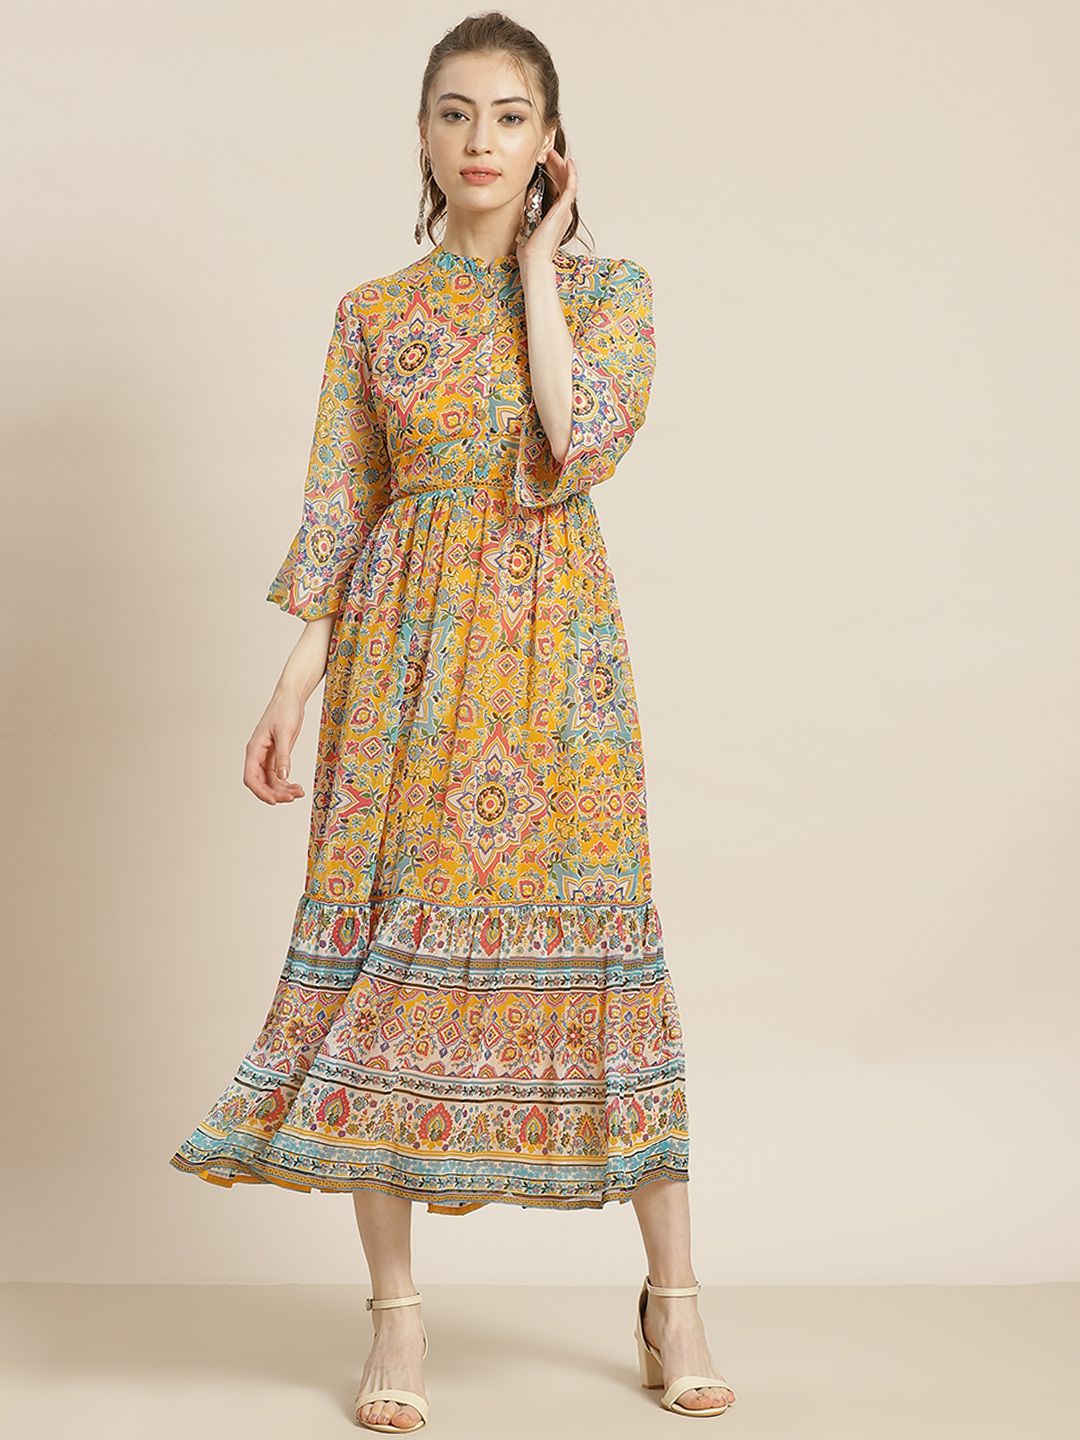 Juniper Mustard Yellow & Blue Ethnic Motifs Printed Tiered A-Line Dress Price in India